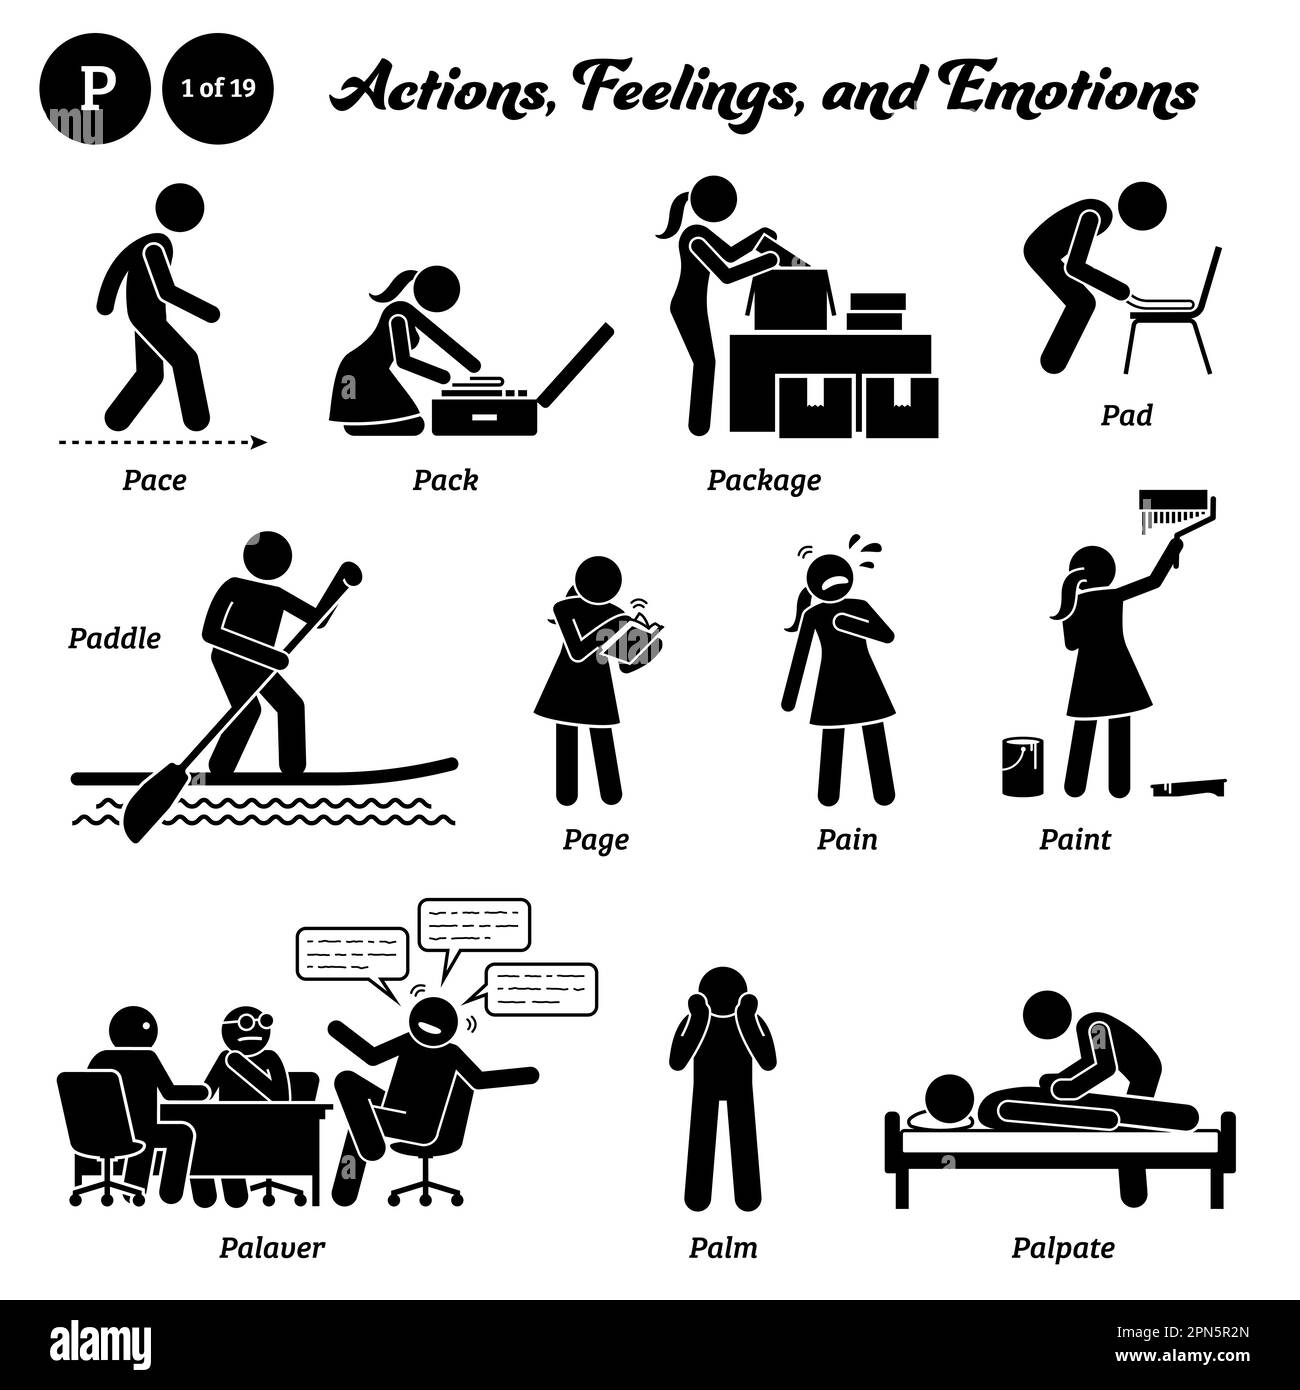 Stick figure human people man action, feelings, and emotions icons alphabet P. Pace, pack, package, pad, paddle, page, pain, paint, palaver, palm, and Stock Vector